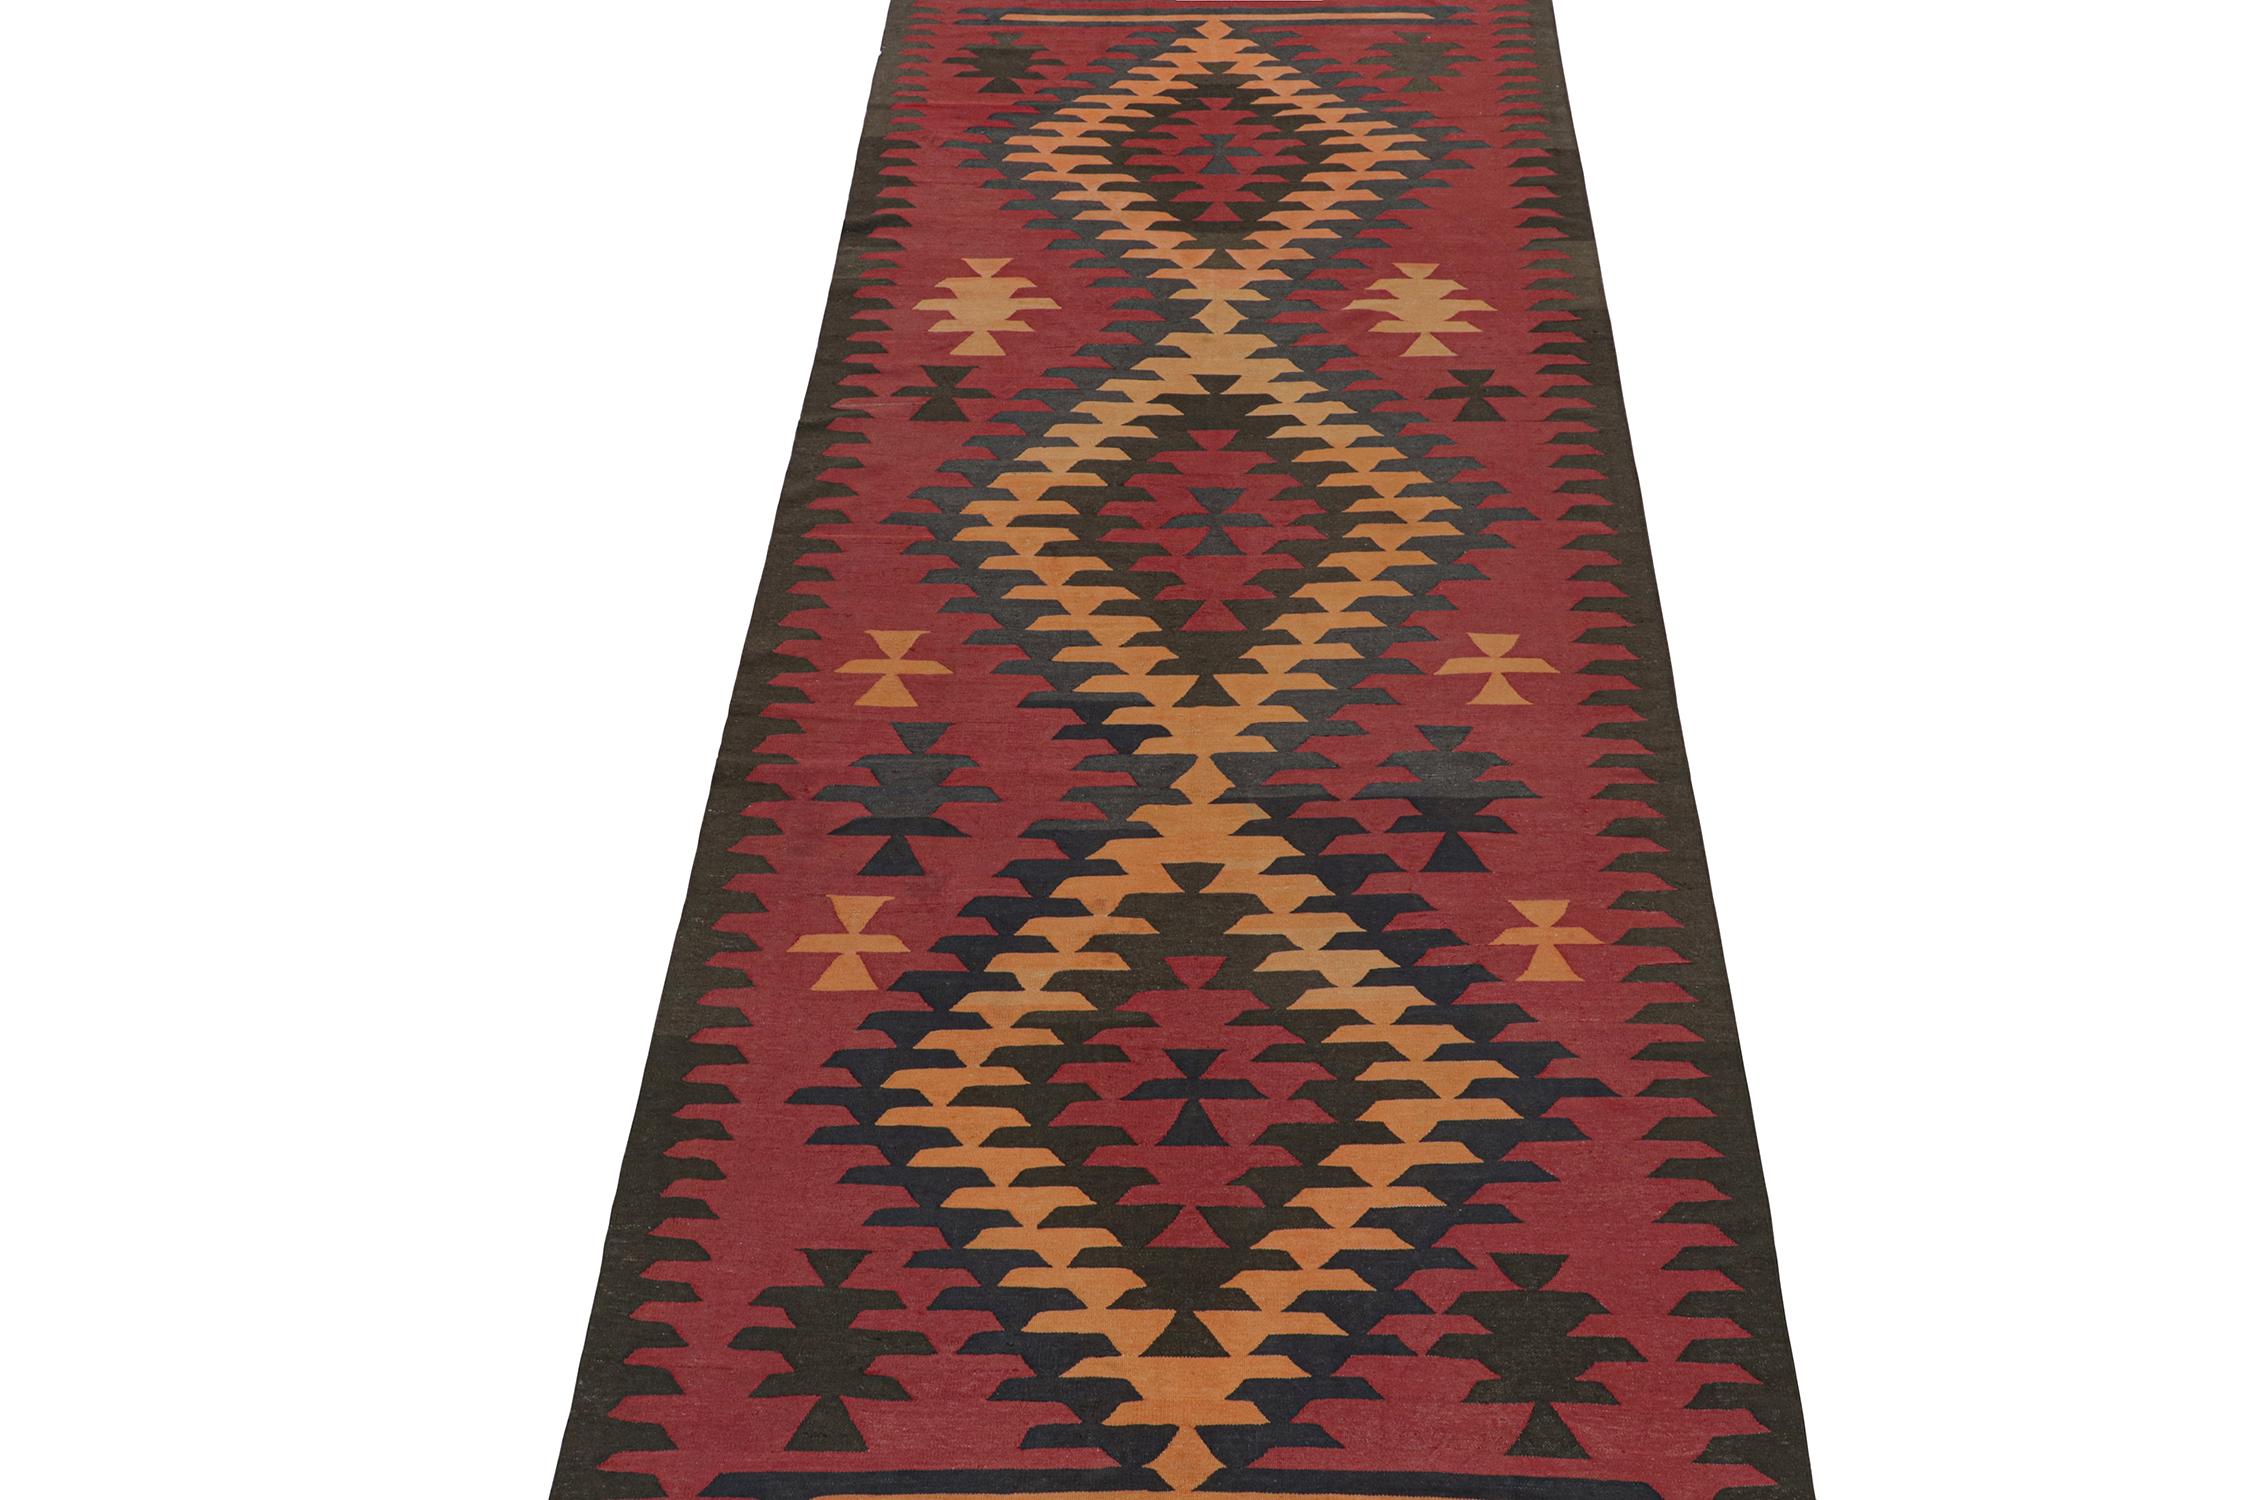 This vintage 5x14 Persian Kilim is handwoven in wool, and originates circa 1950-1960. Connoisseurs may also note that Rug & Kilim believes this to be a Northwest design, and appreciate the culture therein as much as its beauty.

Further on the